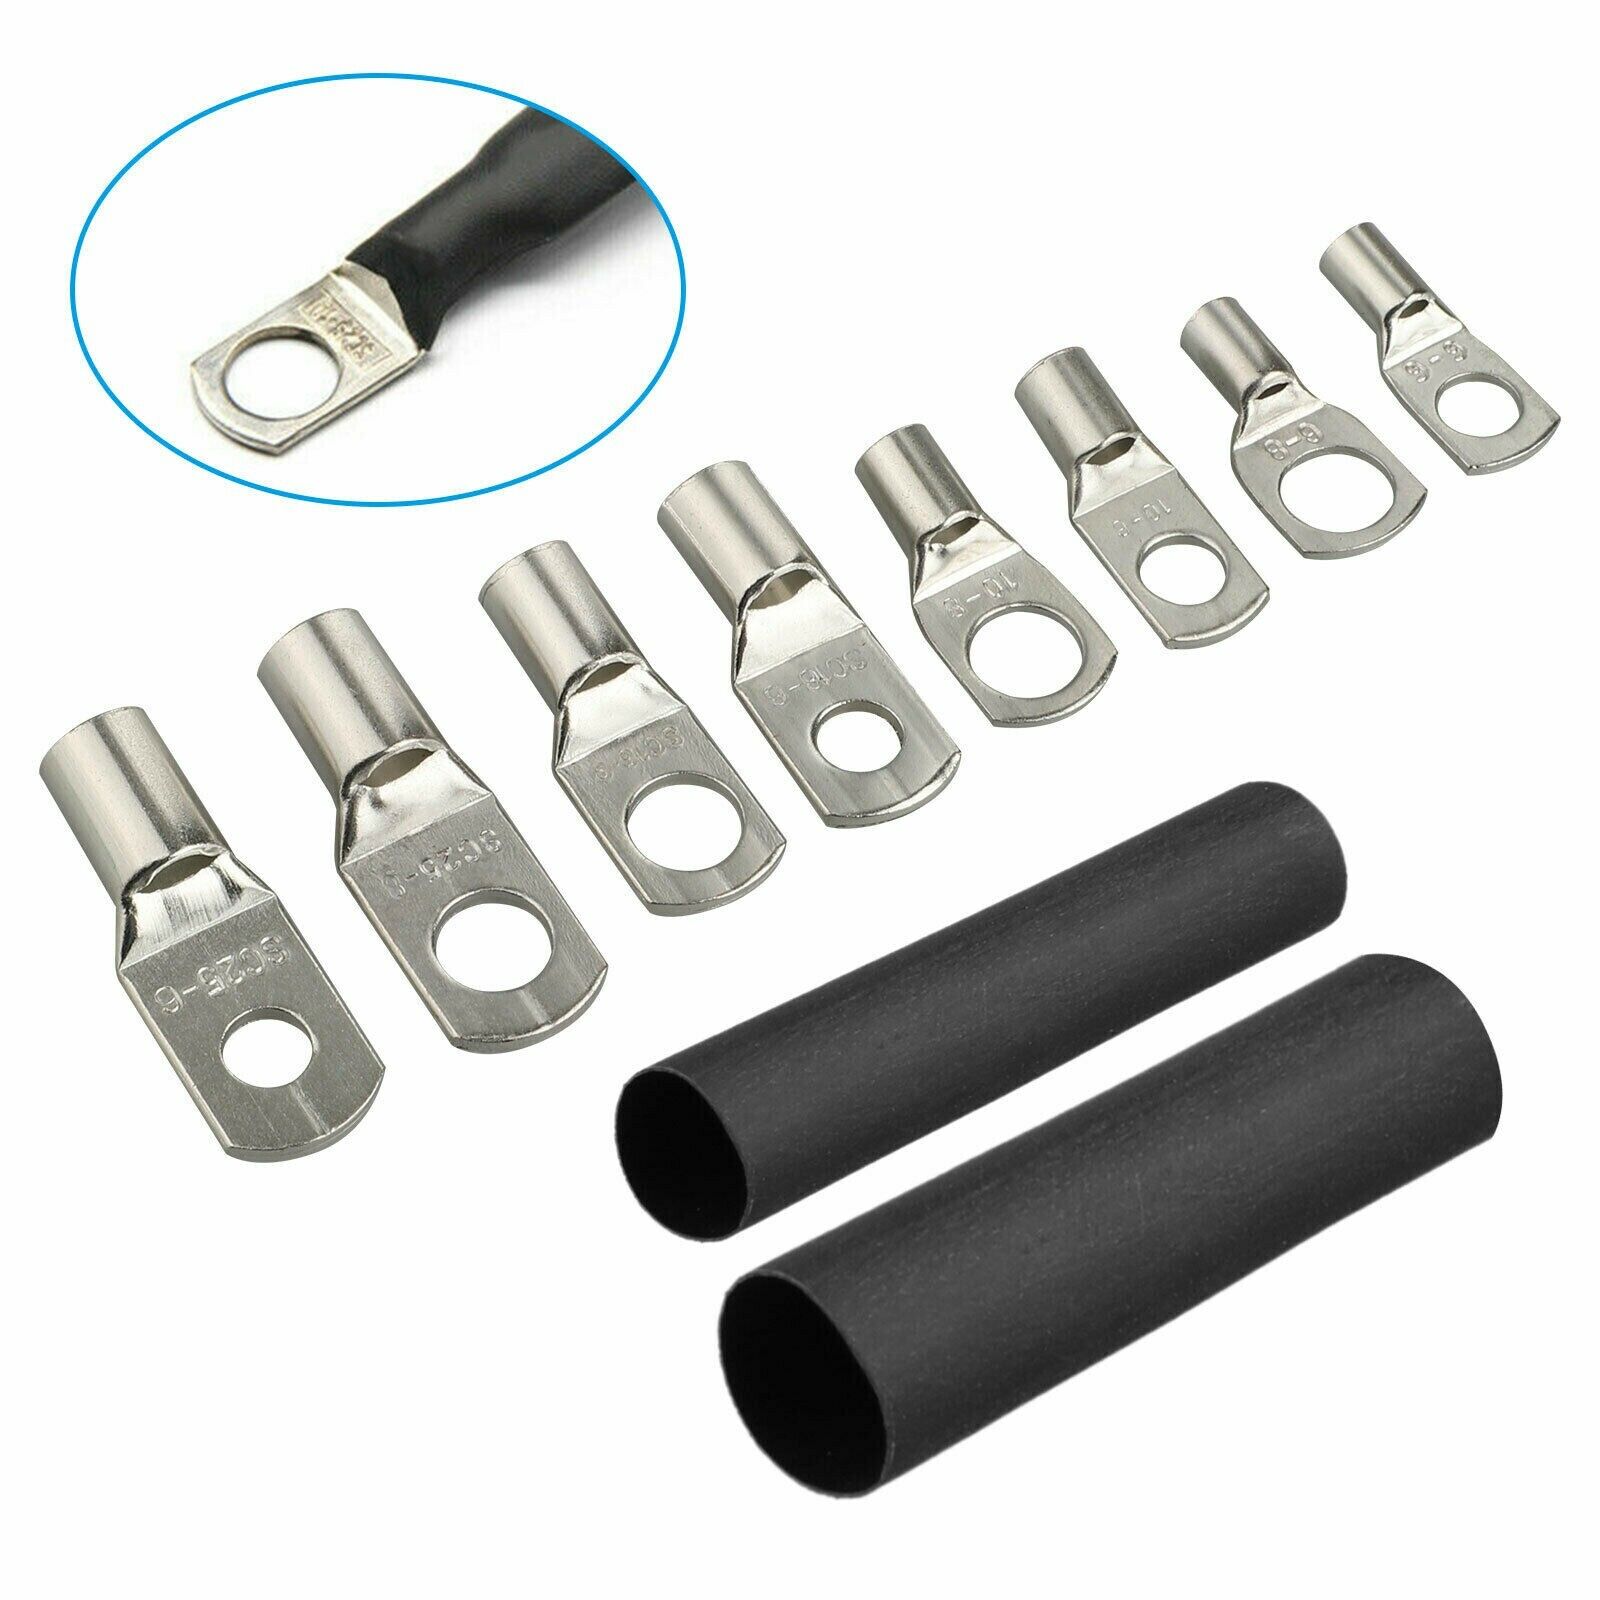 60/Ring Terminal Cable Shoes Lugs 4-35mm2 Tinned Copper Lug Wire eye Connectors Bare Terminals Lugs Wire Copper Kit